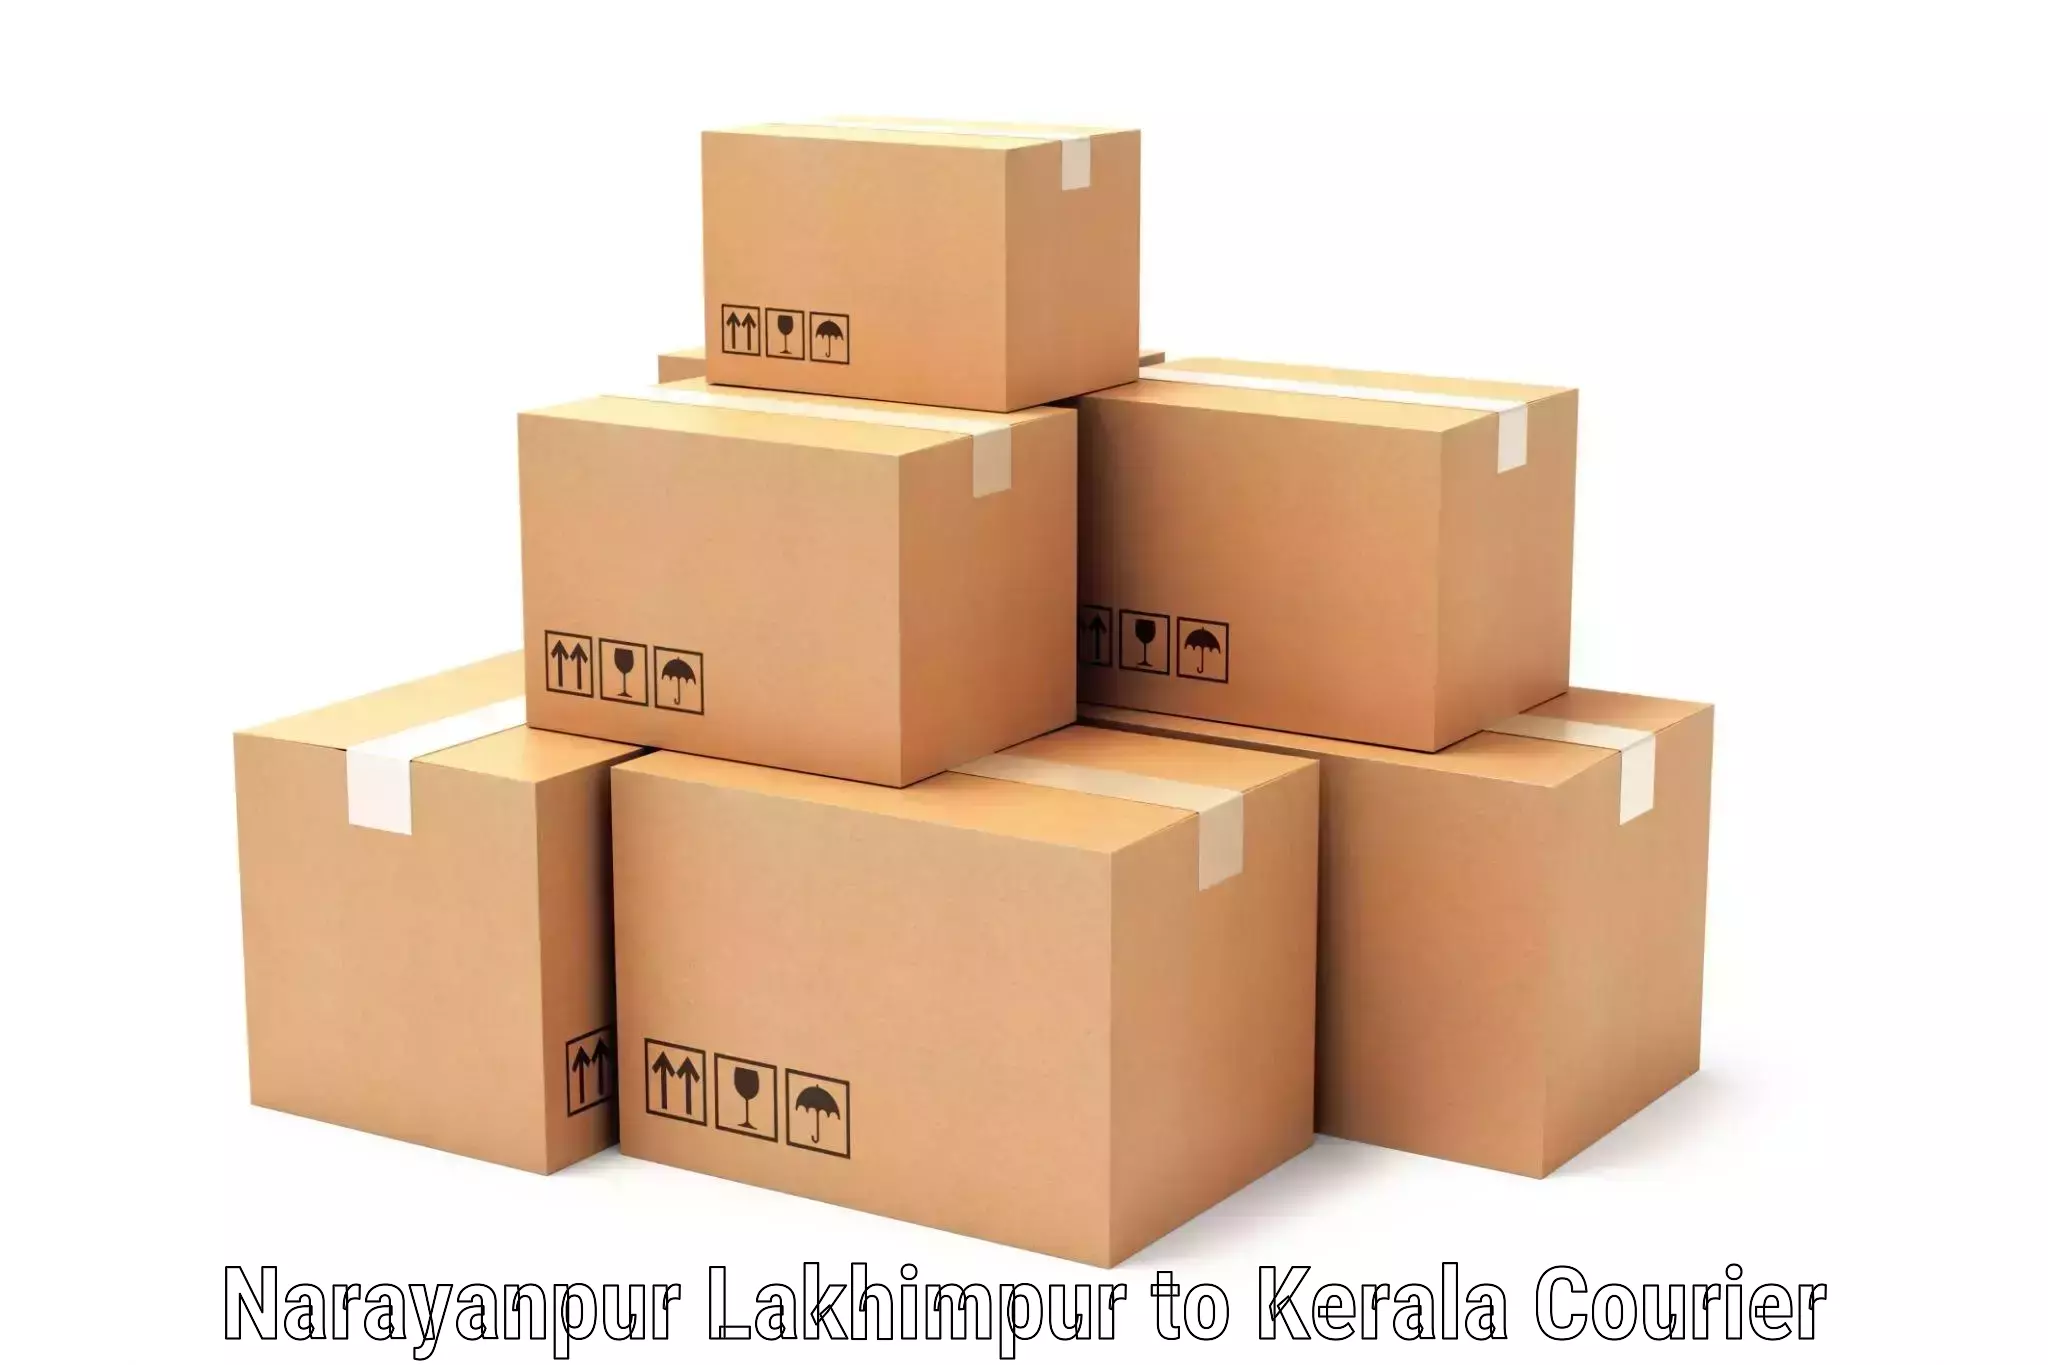 Cargo delivery service Narayanpur Lakhimpur to IIT Palakkad